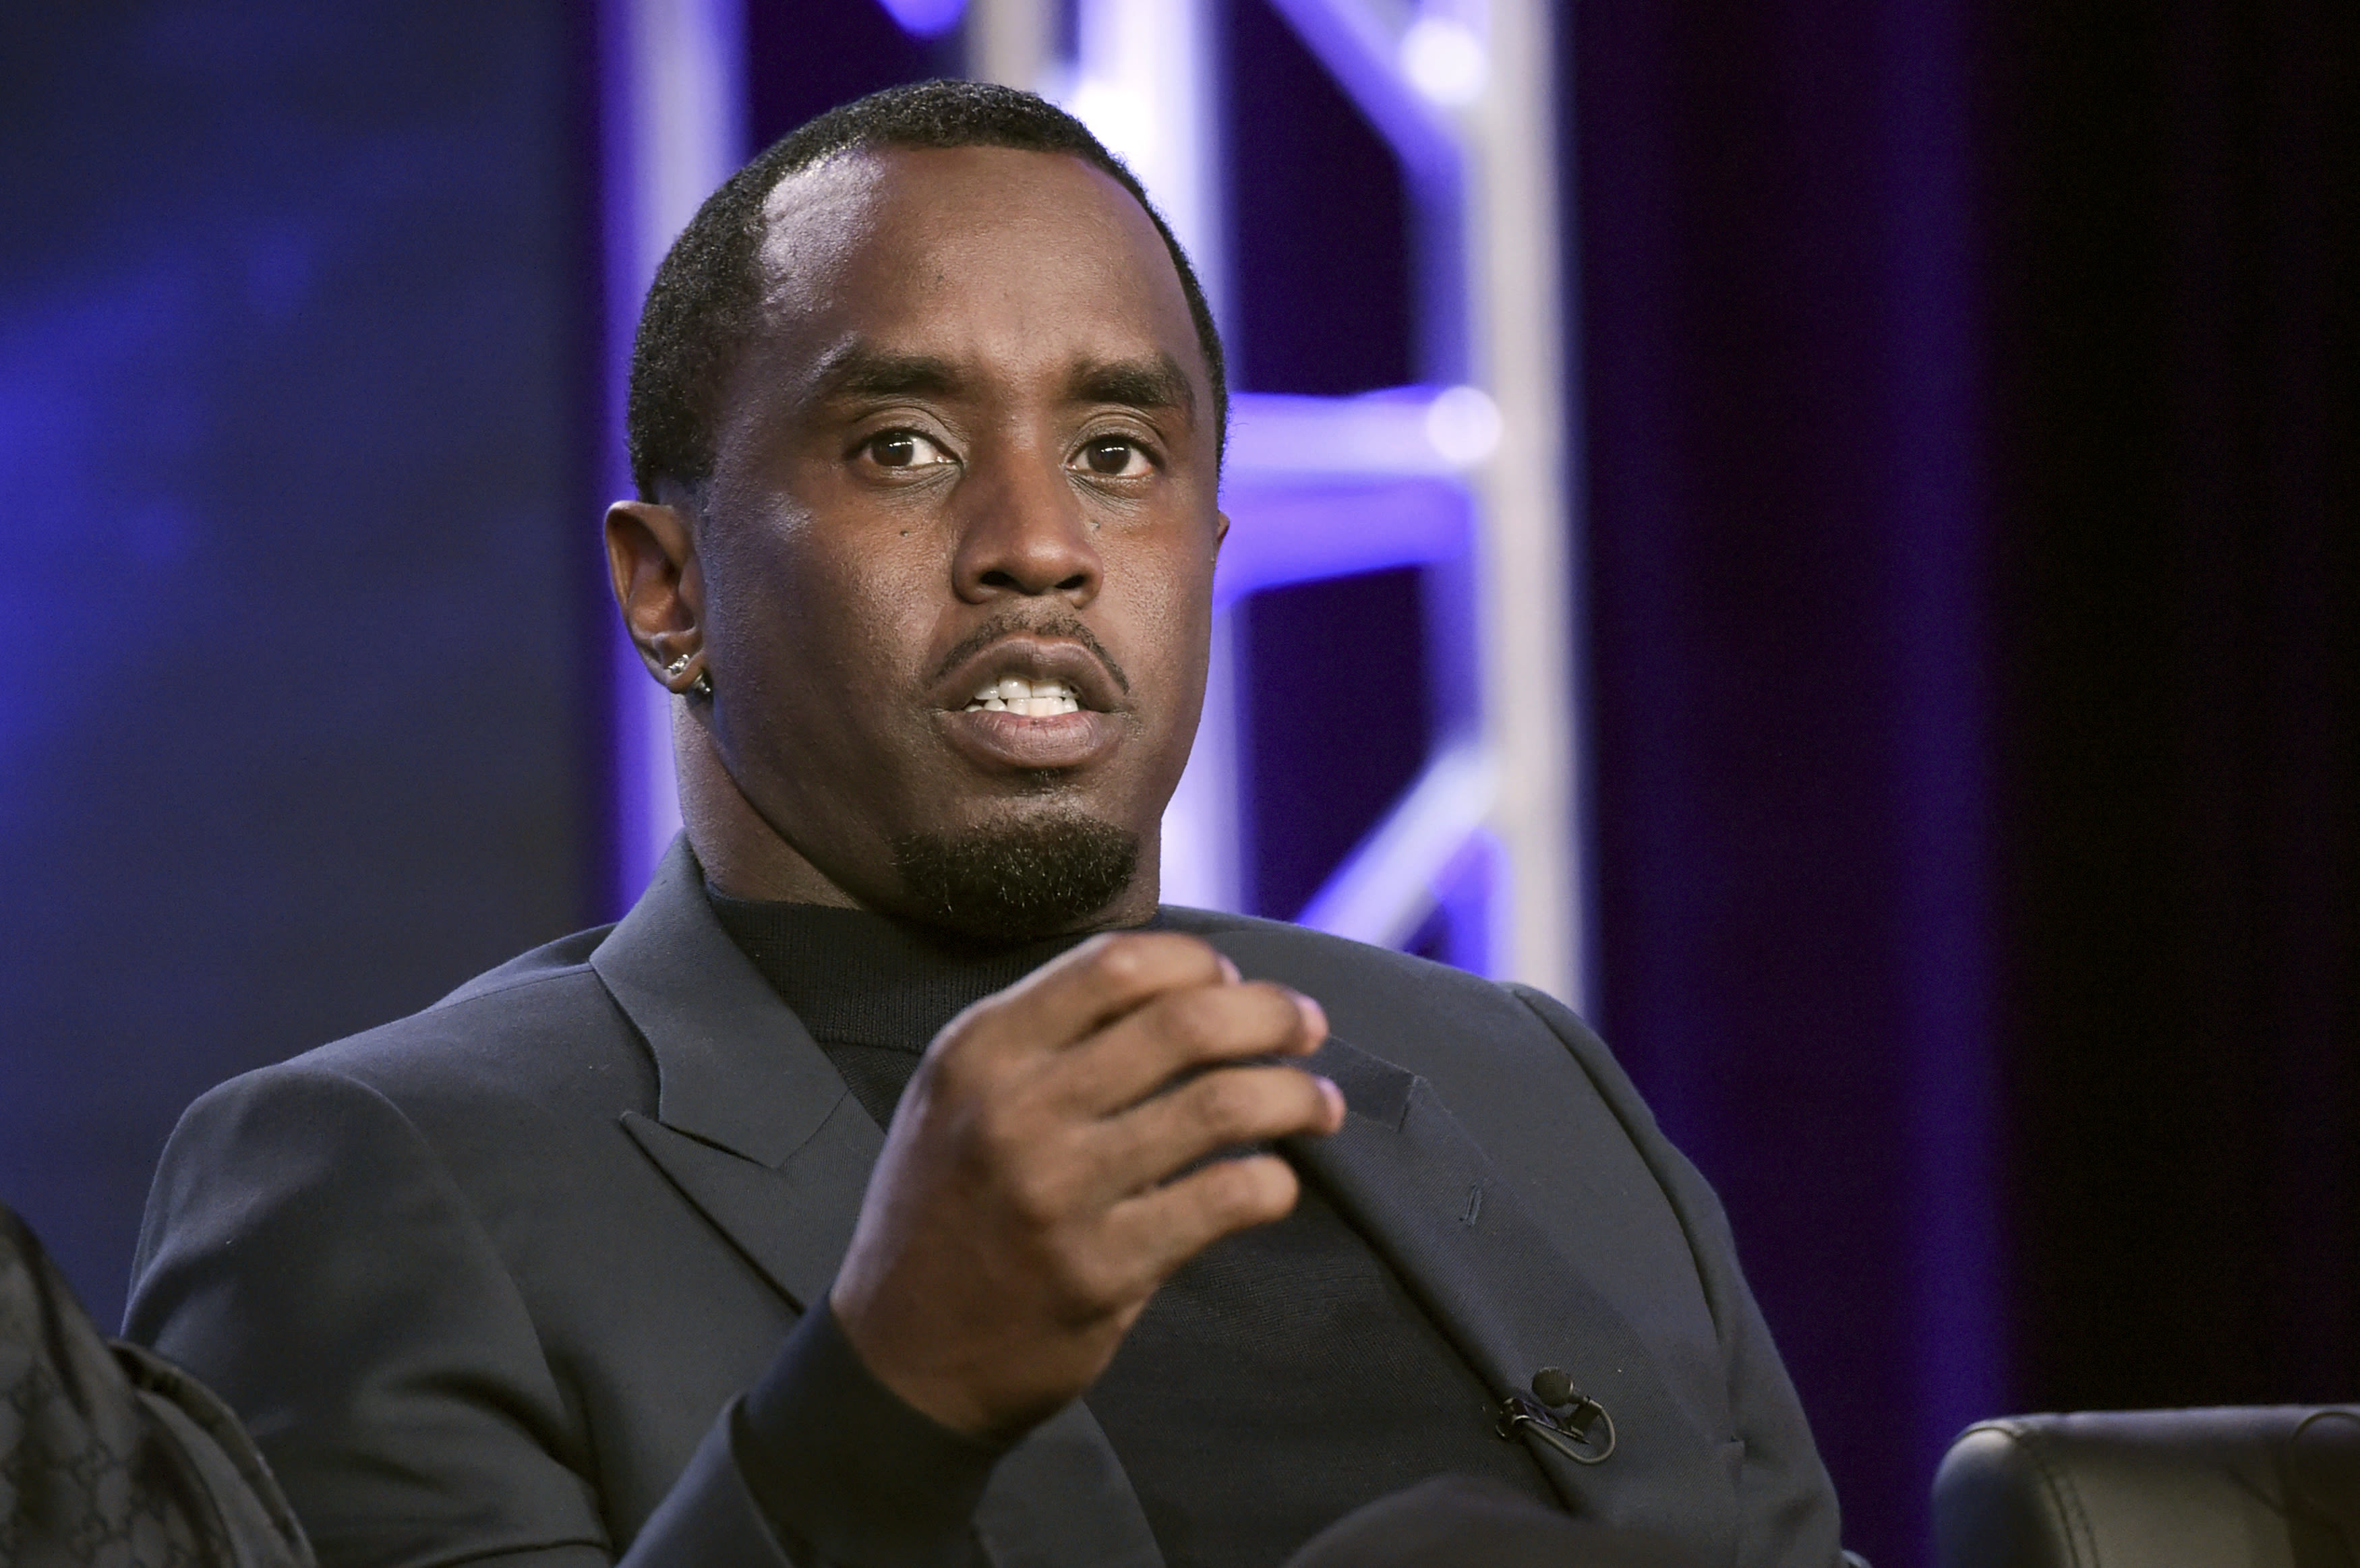 One of Sean 'Diddy' Combs’ accusers is from Chicago. Who is Lil Rod?